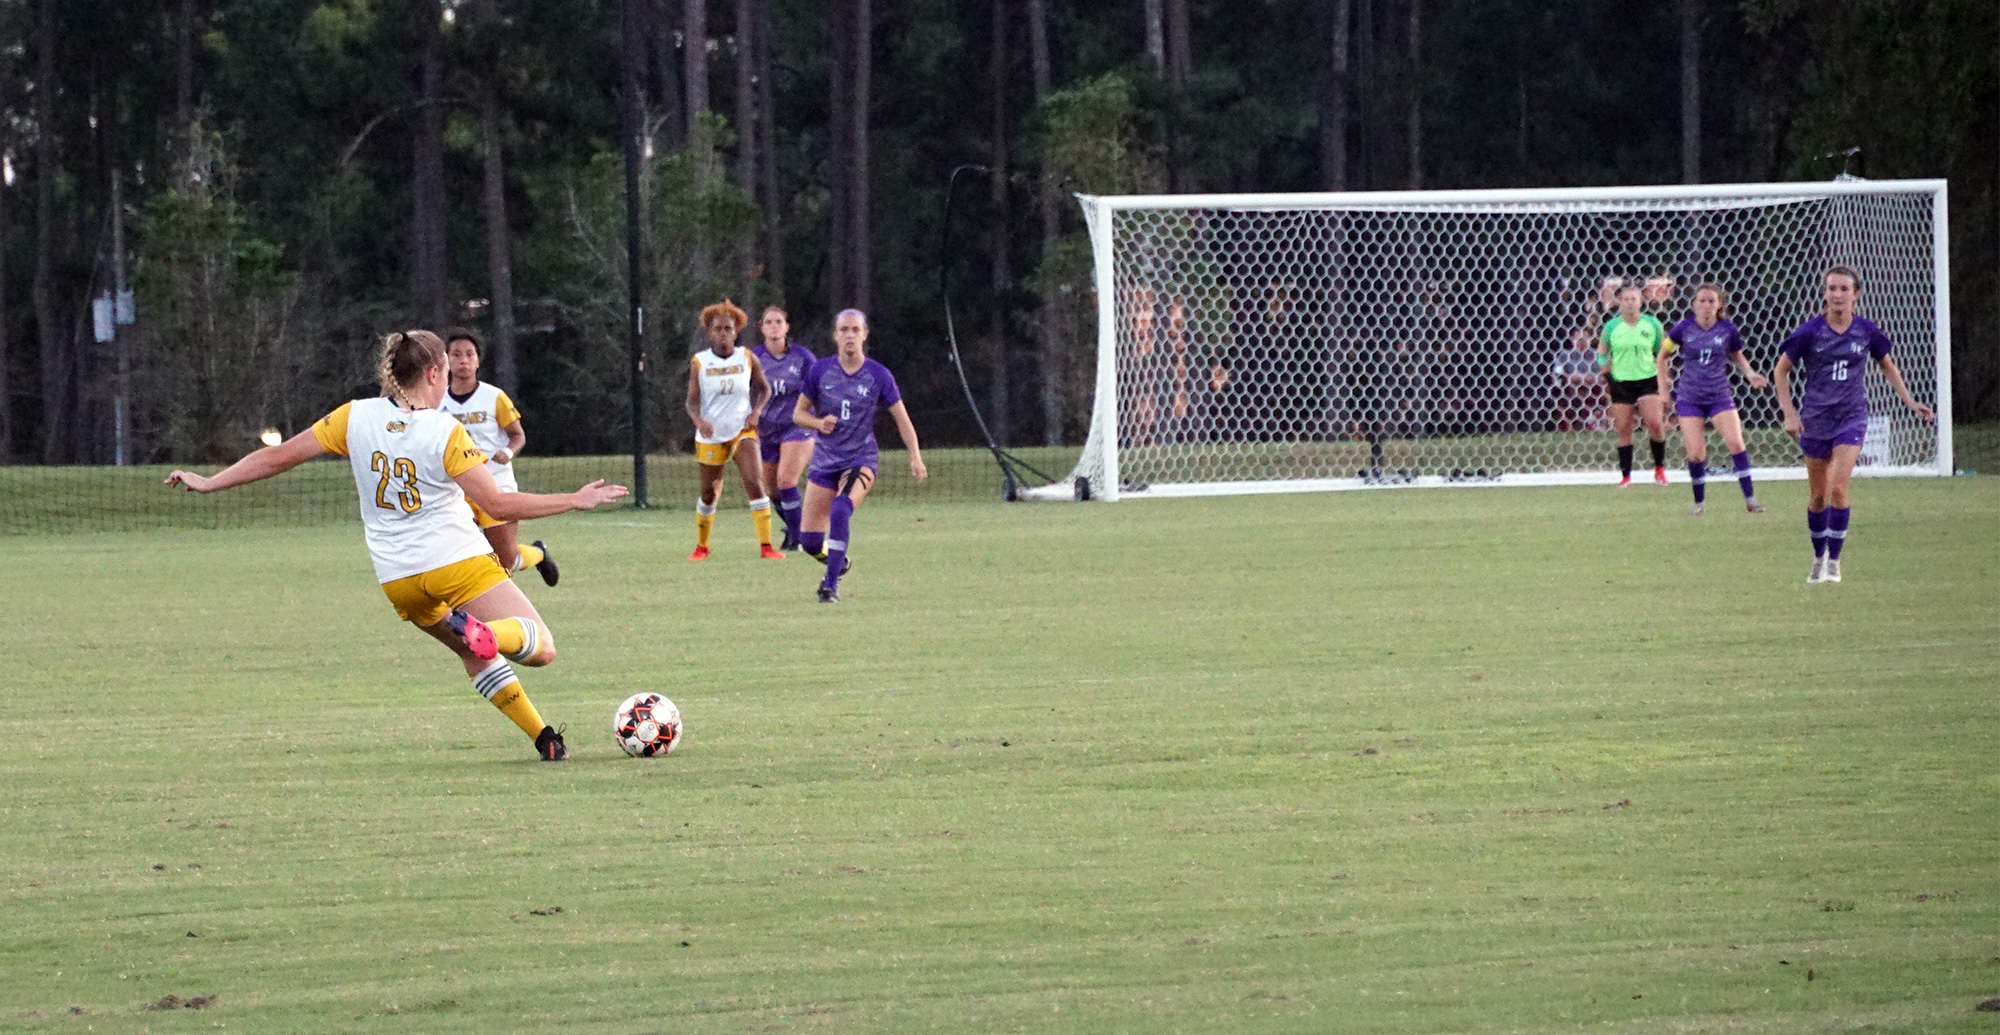 Lady Canes continue with best start in Program History